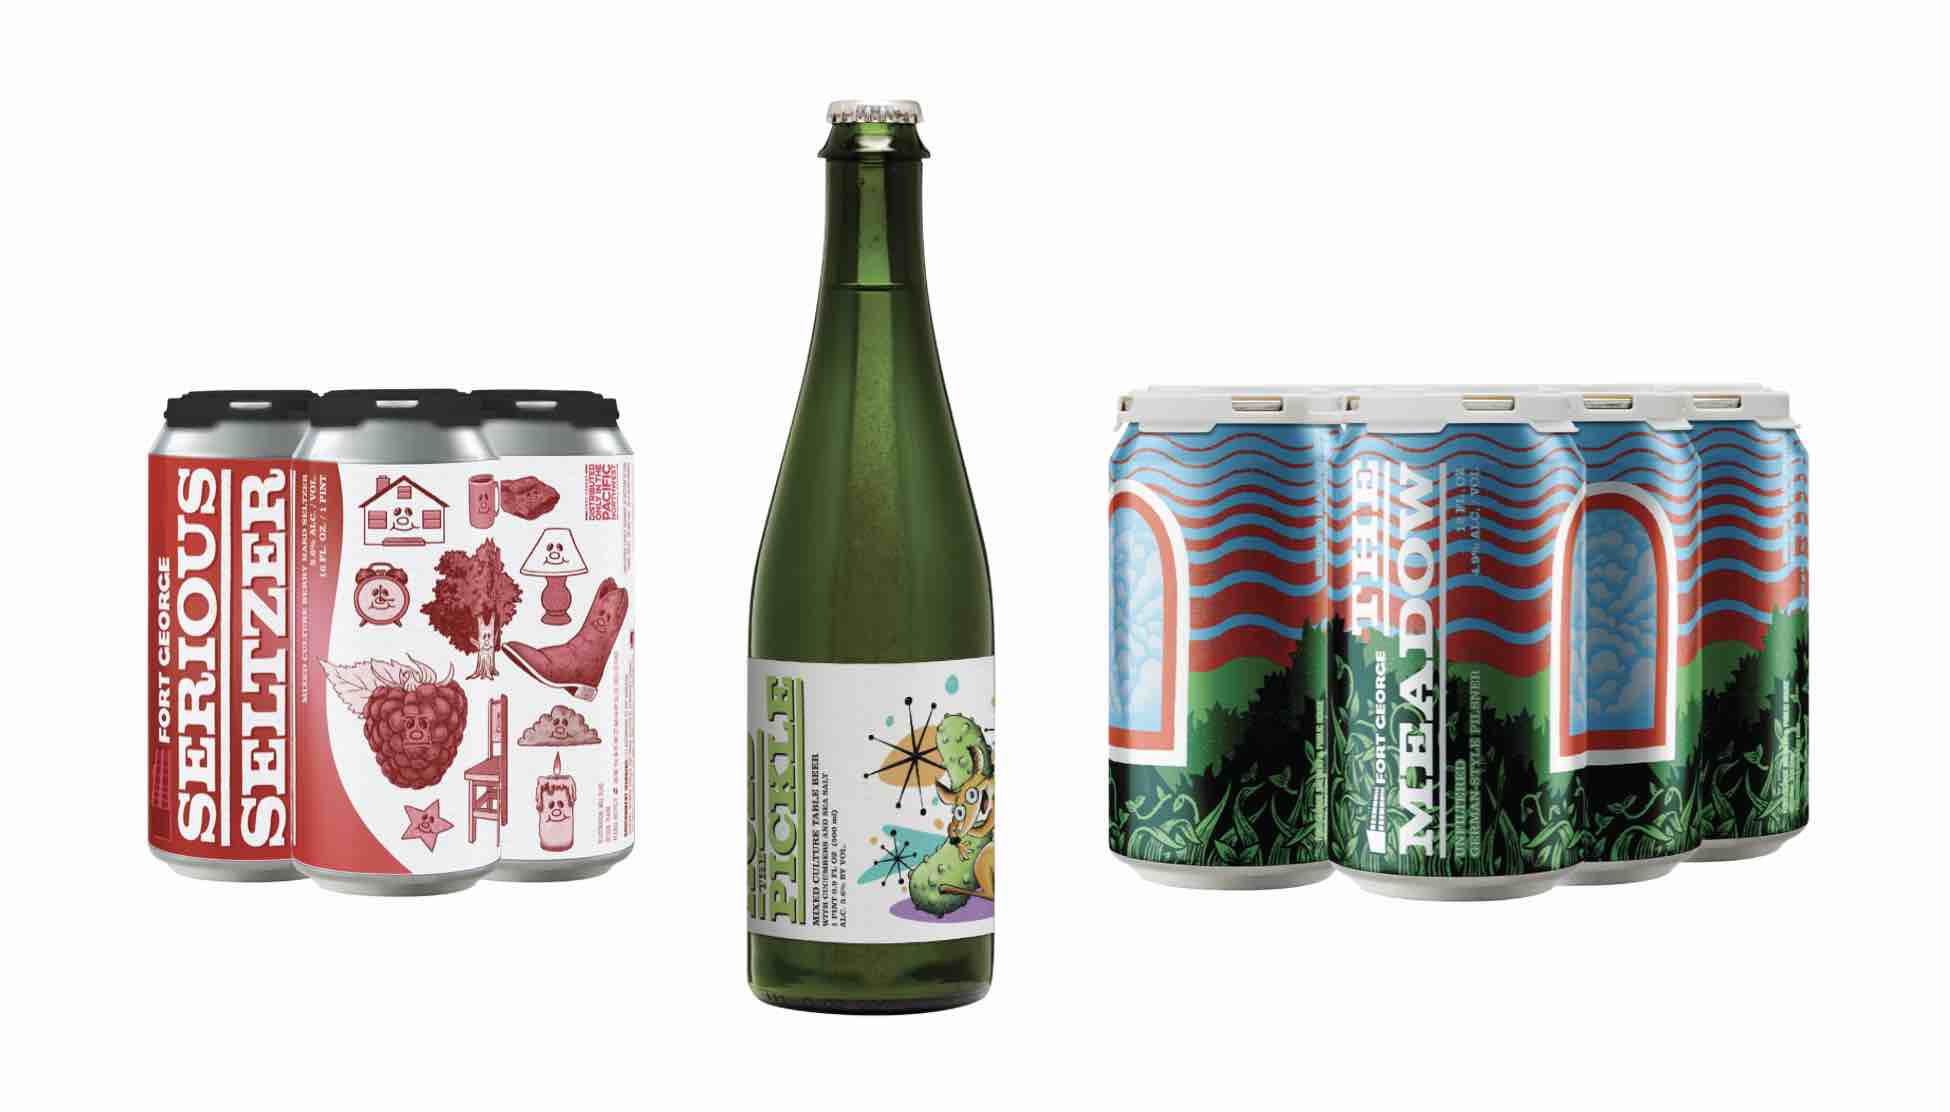 Fort George Brewery 2021 Spring Releases - Serious Seltzer, Hold the Pickle, and The Meadow